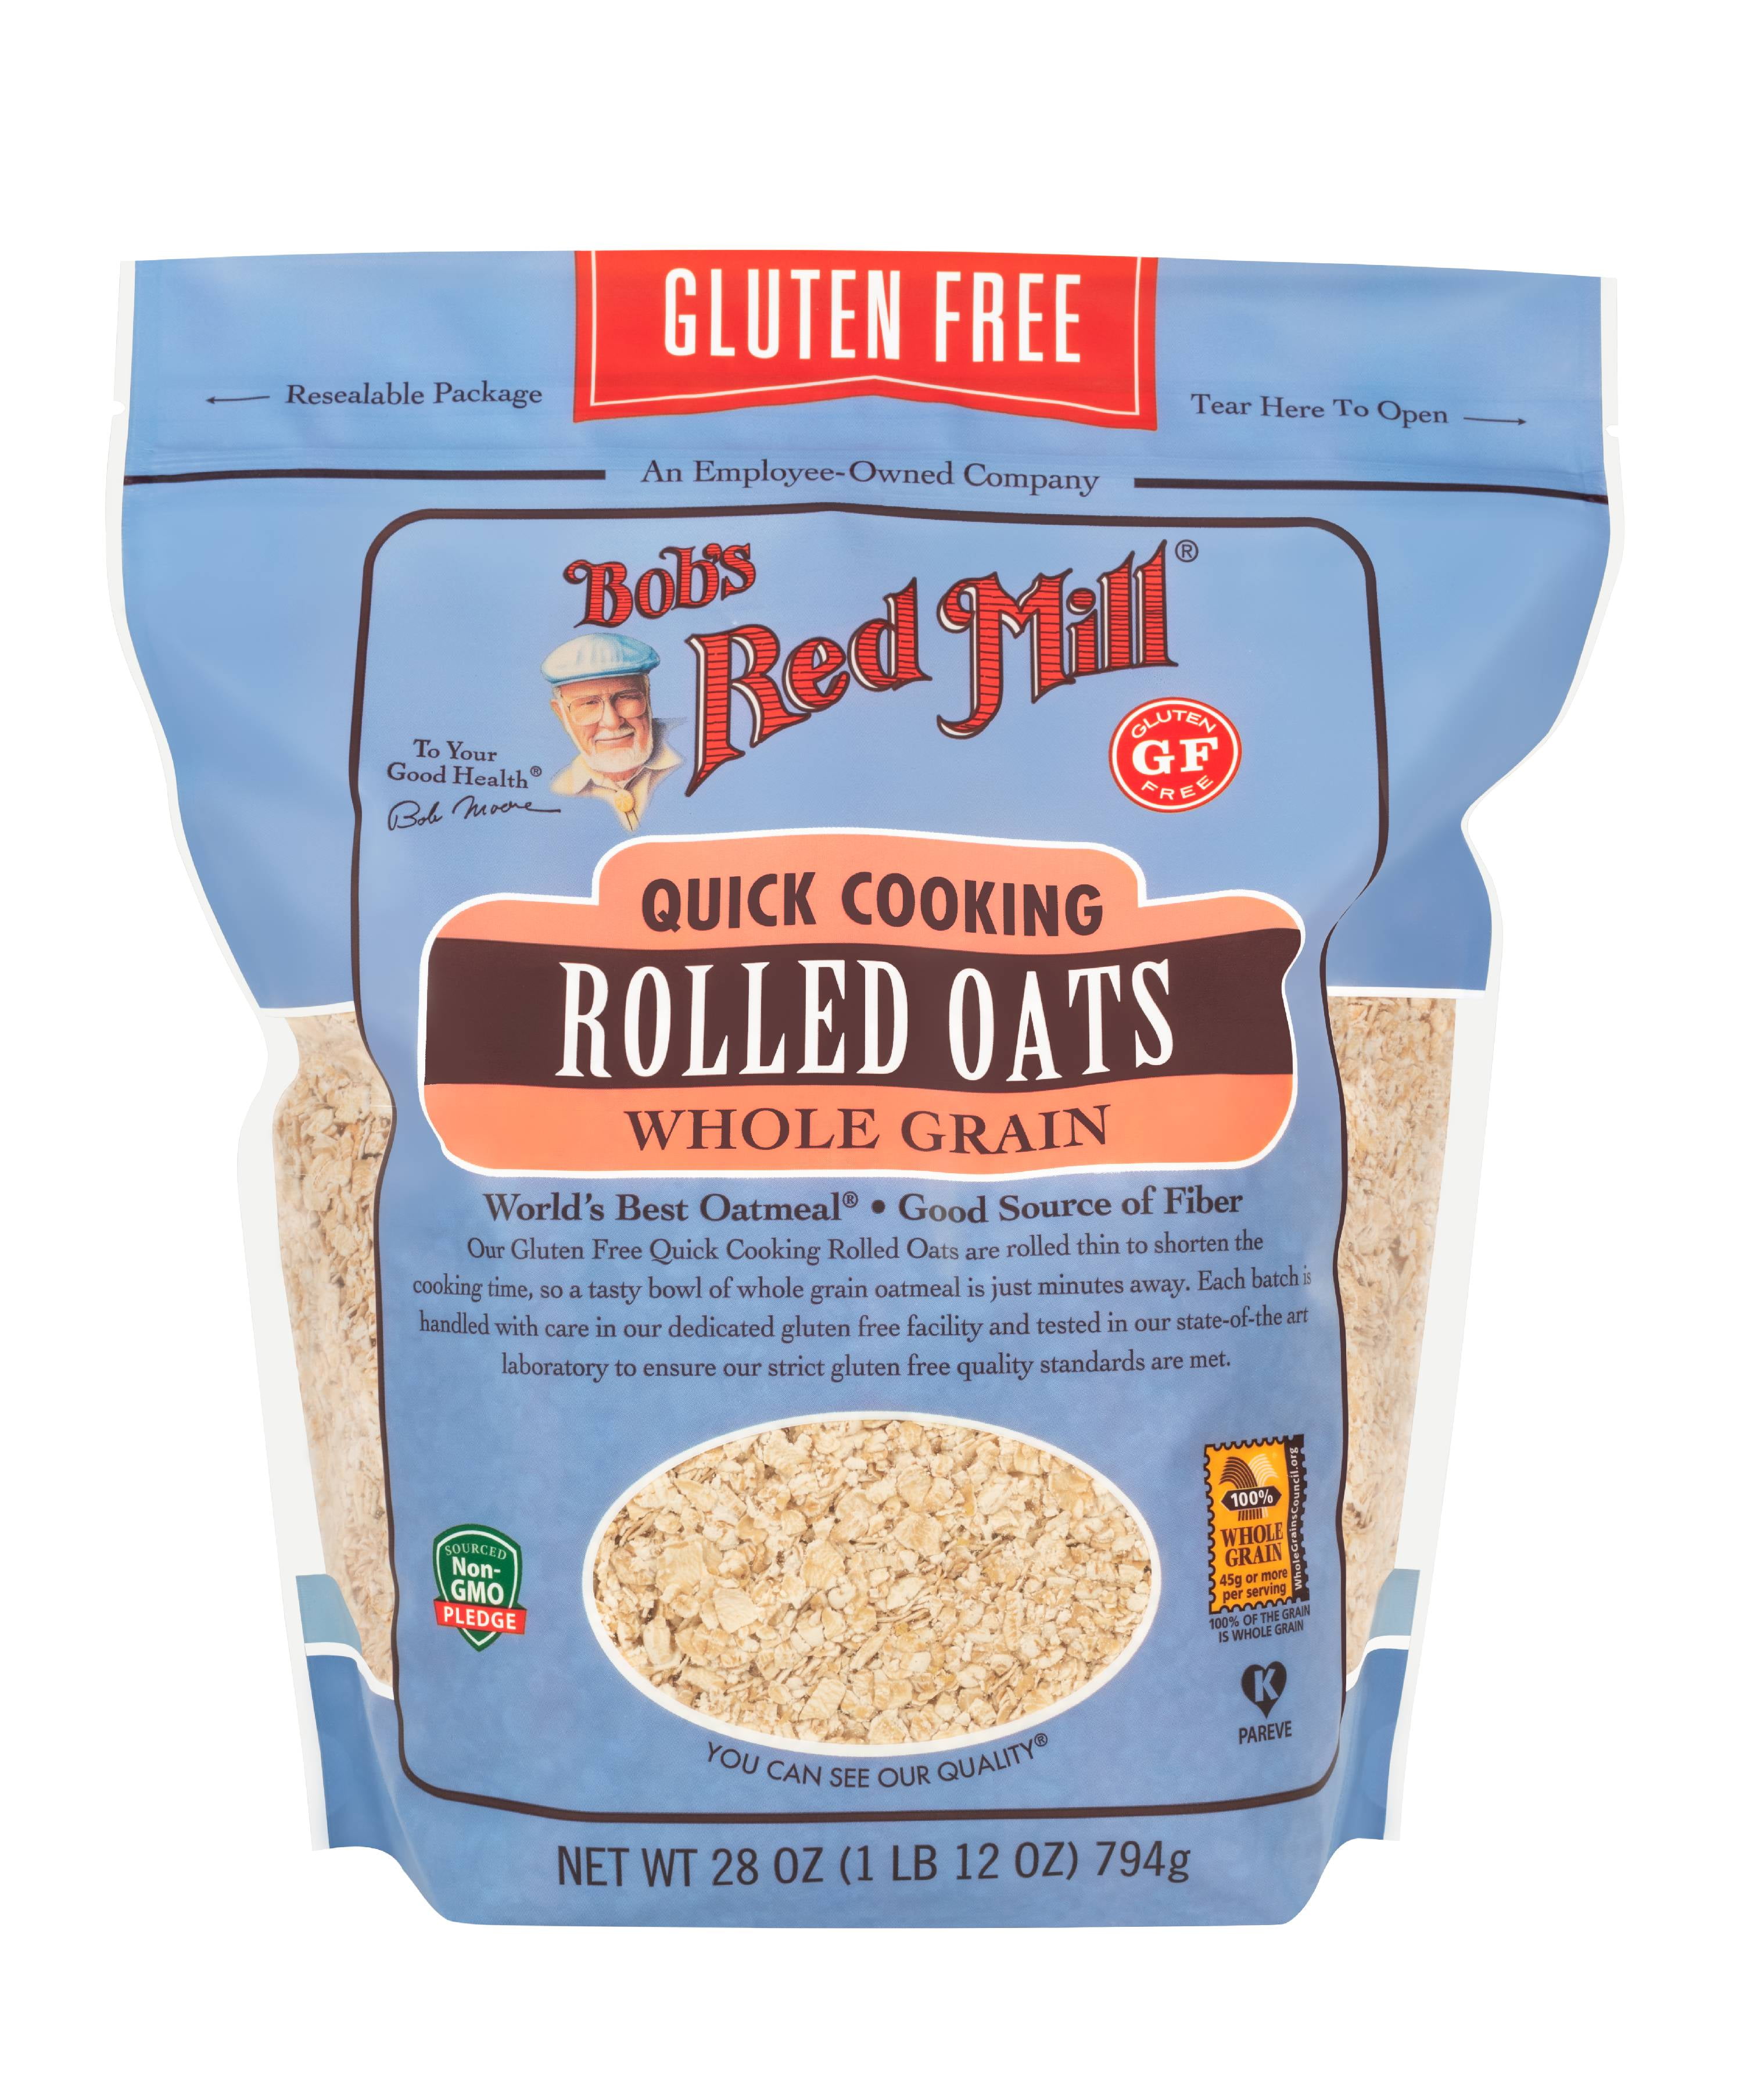 Bob's Red Mill Gluten Free Quick Cooking Rolled Oats, 28 Oz